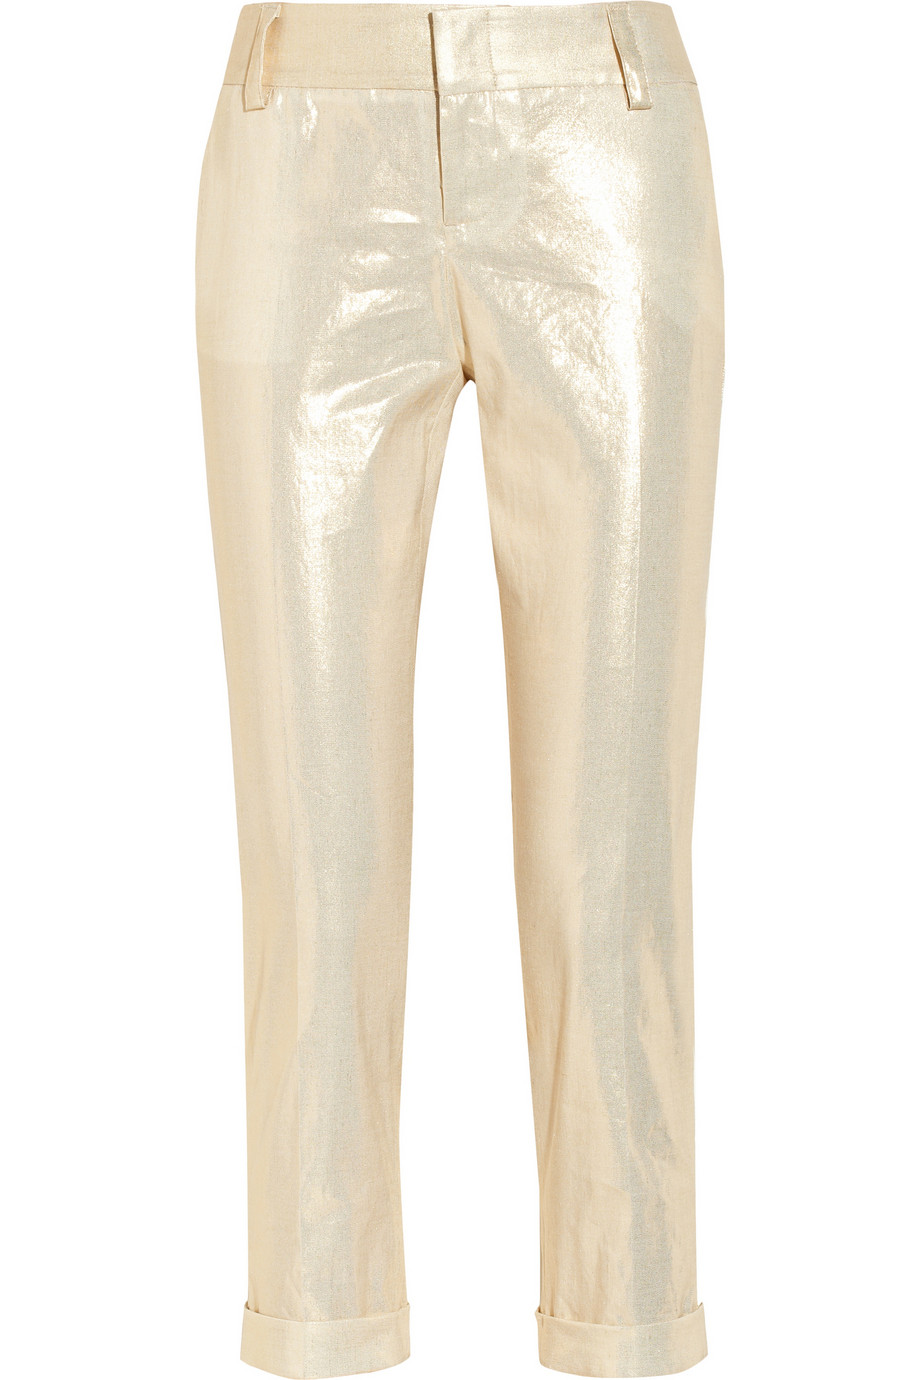 Alice + Olivia Stacey Cropped Metallic Linen-blend Skinny Pants in Gold ...